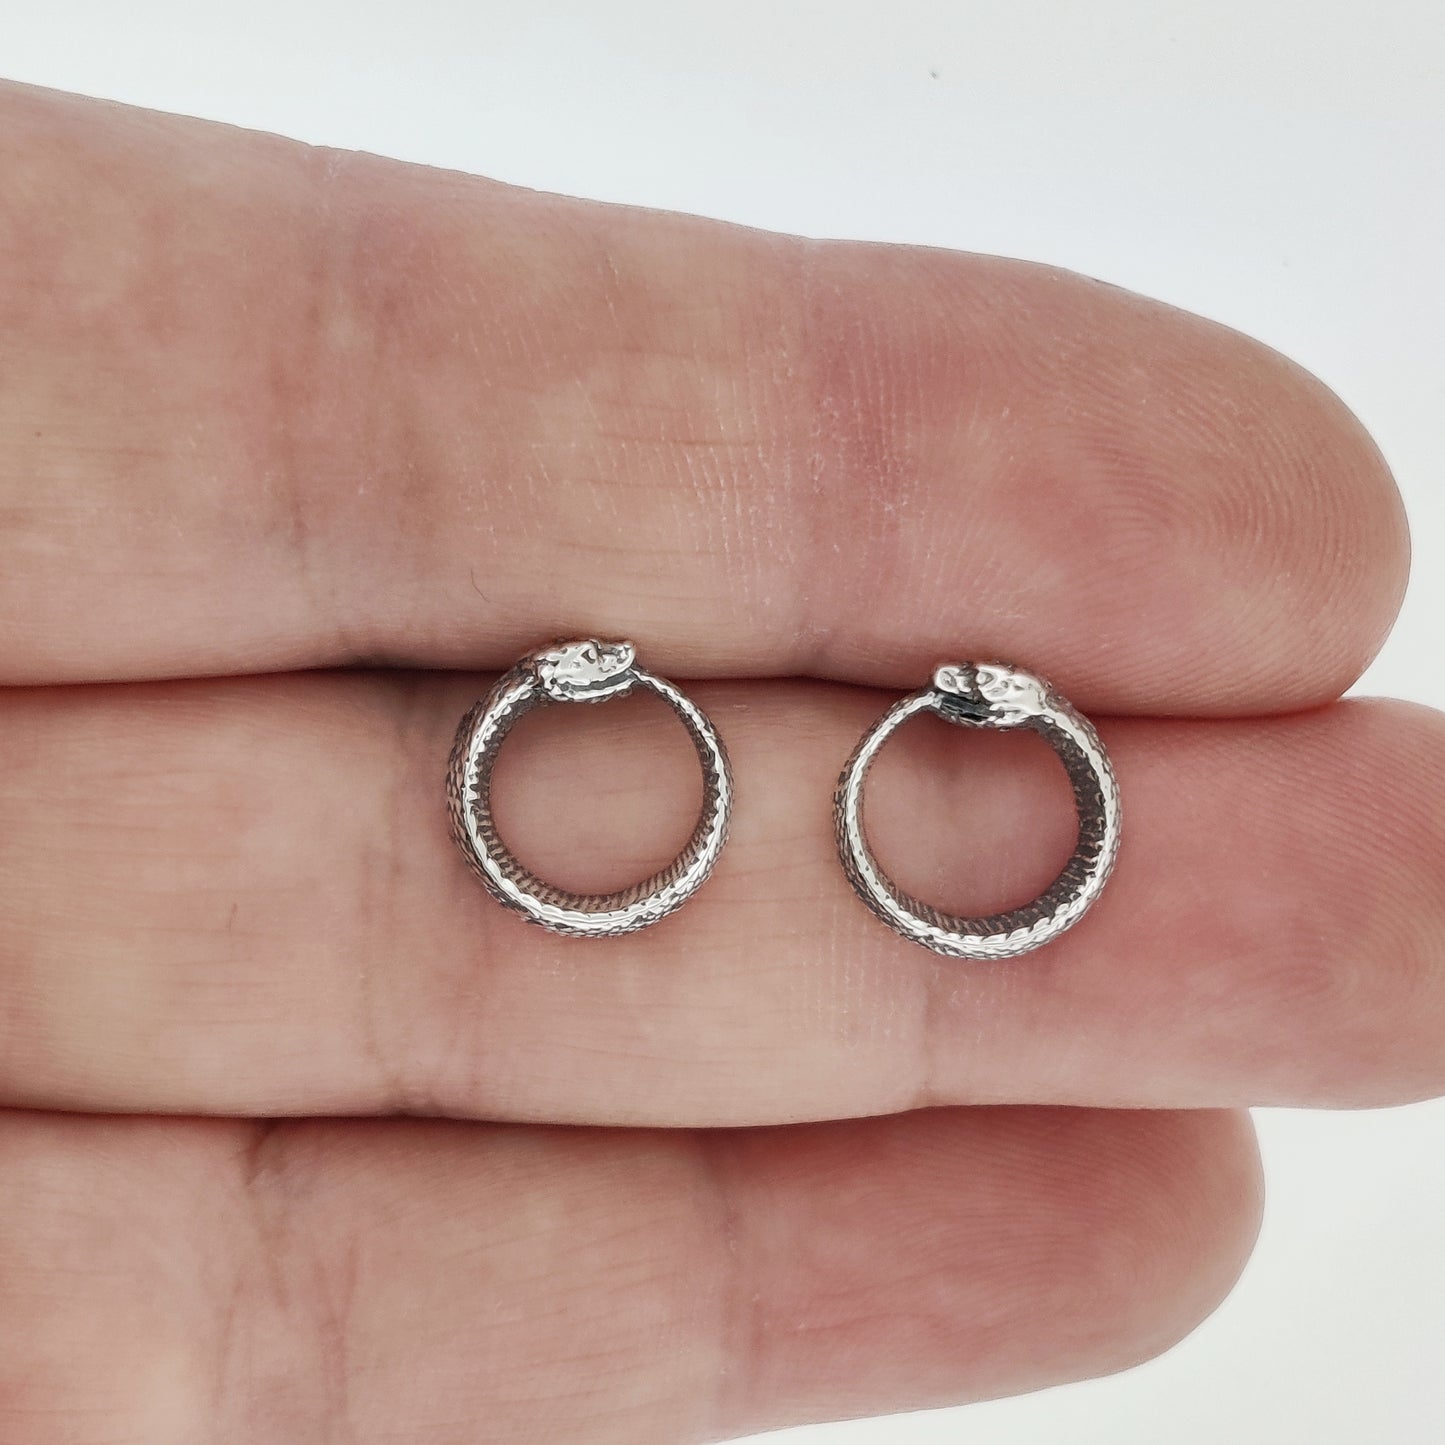 ouroboros stud earrings in sterling silver, silver ouroboros earrings, sterling silver ouroboros earrings, silver stud earrings, silver snake earrings, snake eating it's own tail, metaphysical earrings, pagan earrings in sterling silver, silver snake stud earrings, ouroboros stud earrings